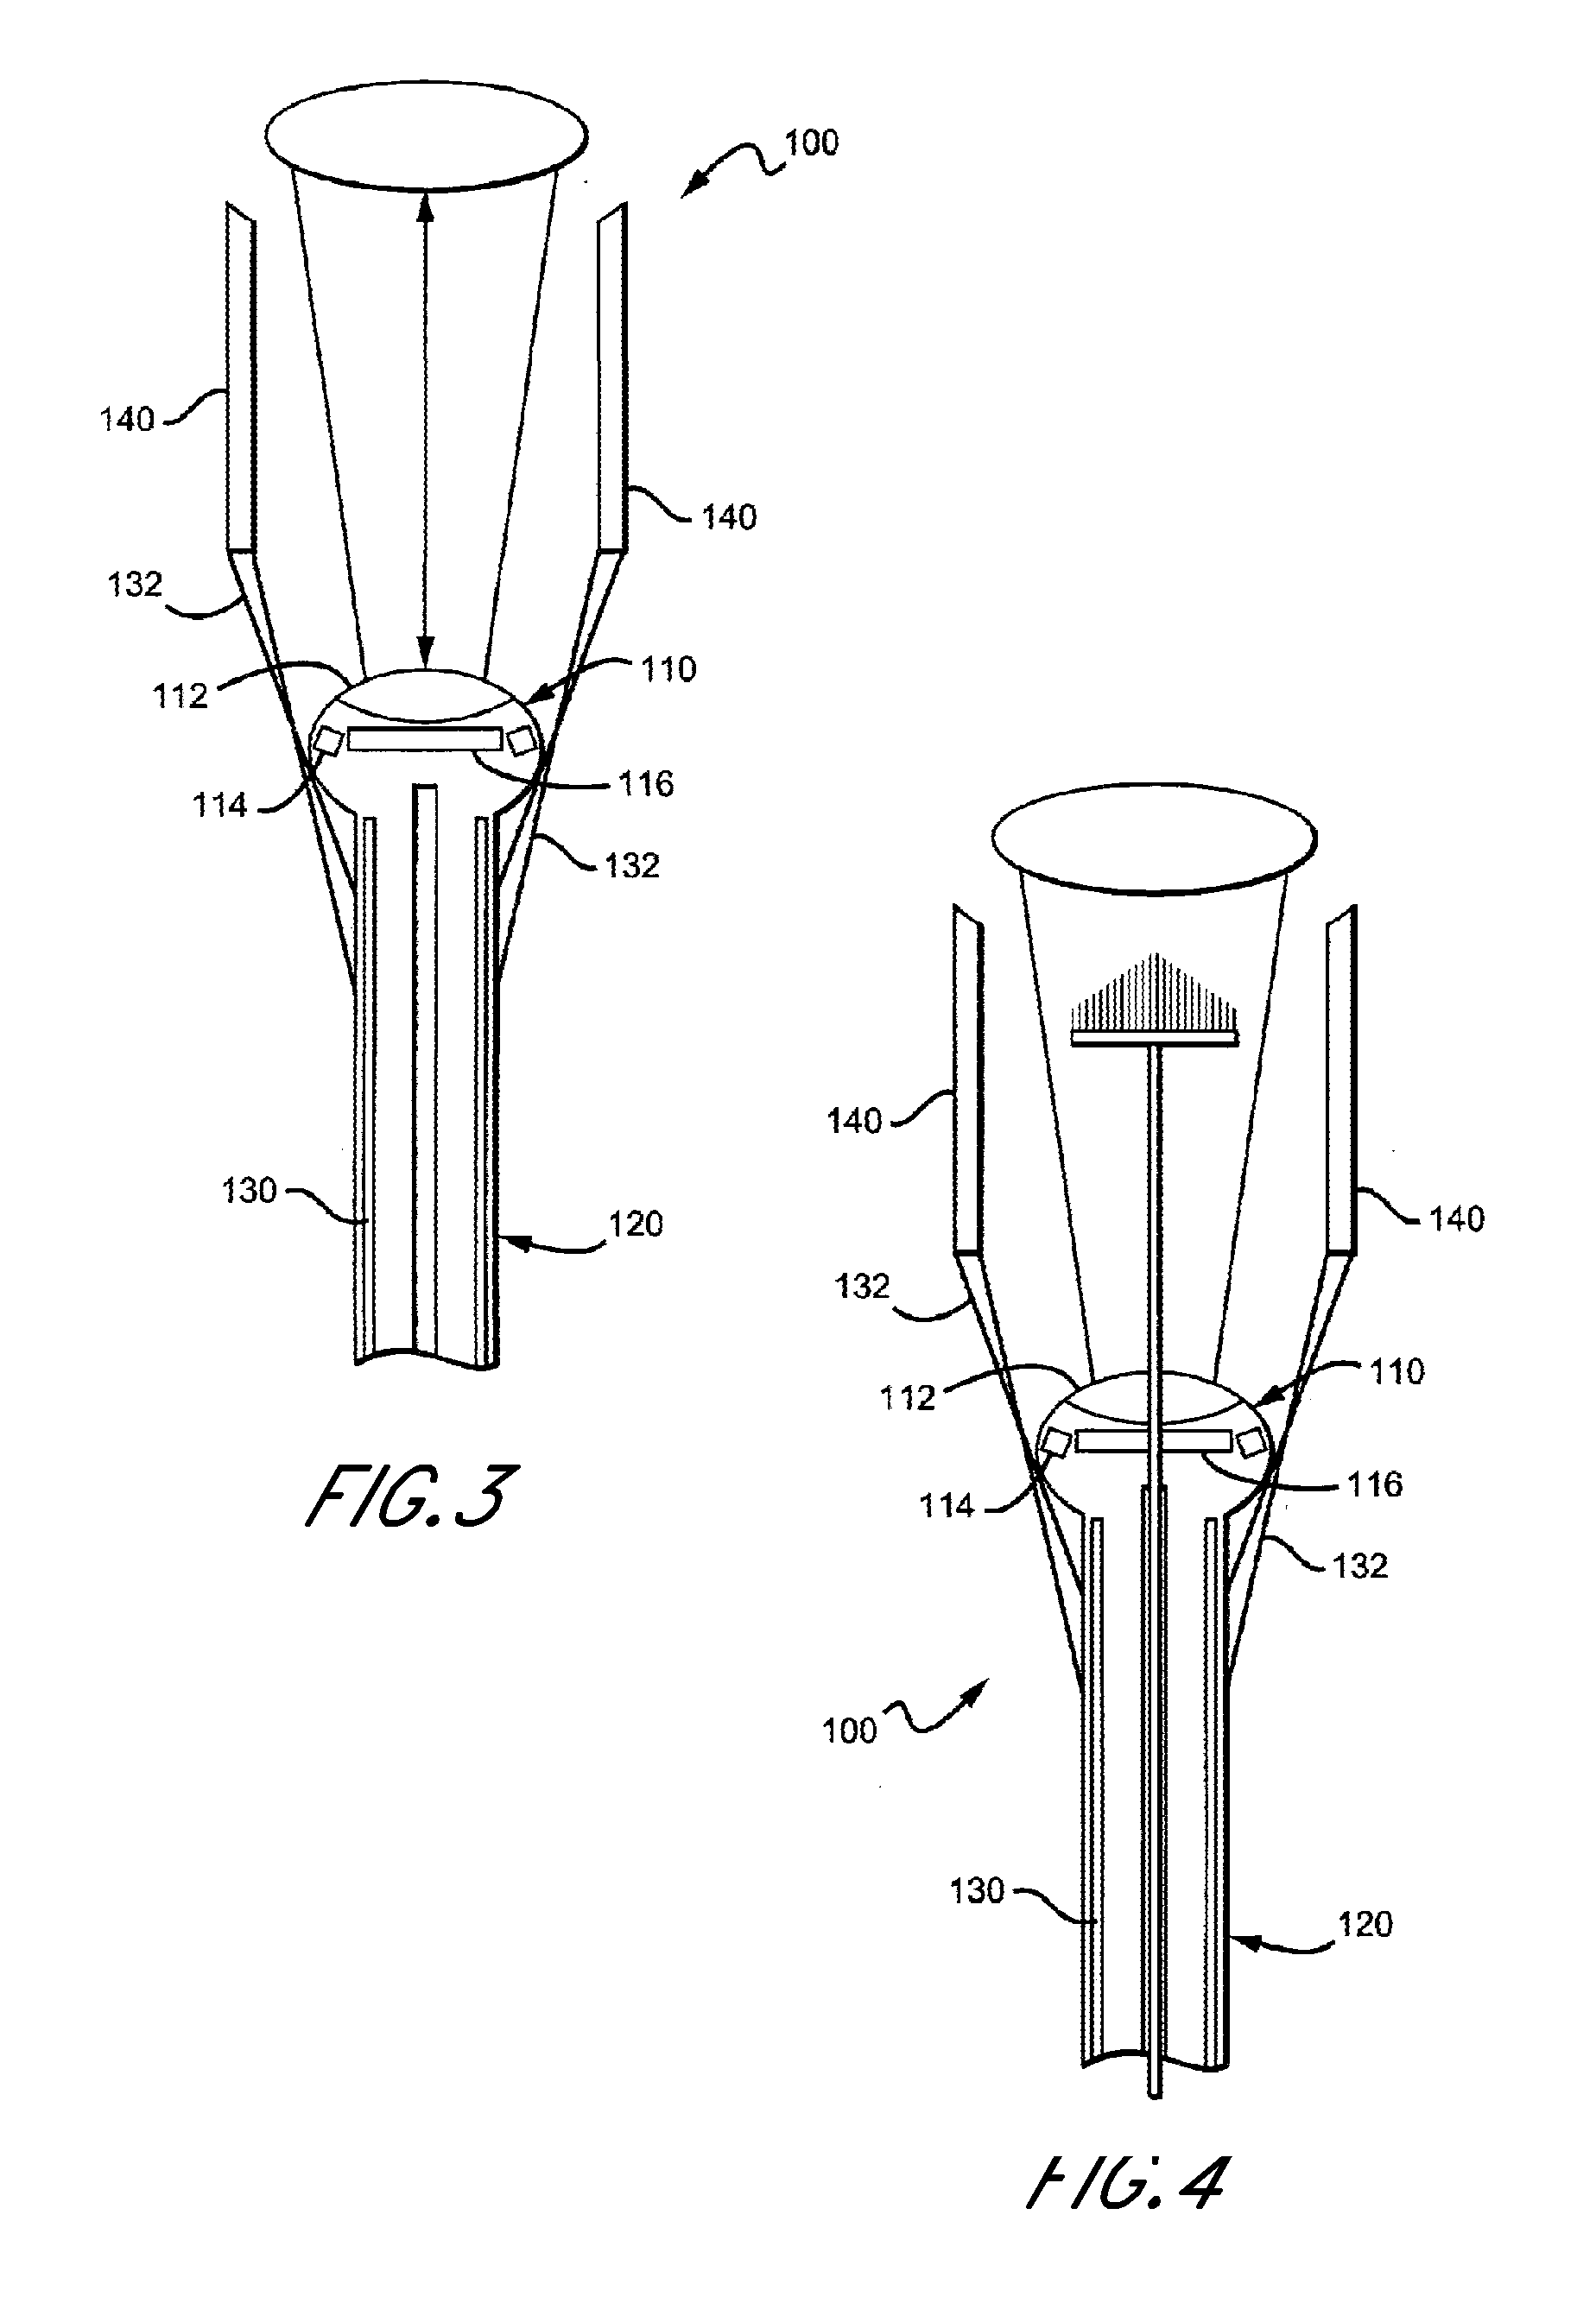 Apparatus and methods for examining, visualizing, diagnosing, manipulating, treating and recording of abnormalities within interior regions of body cavities